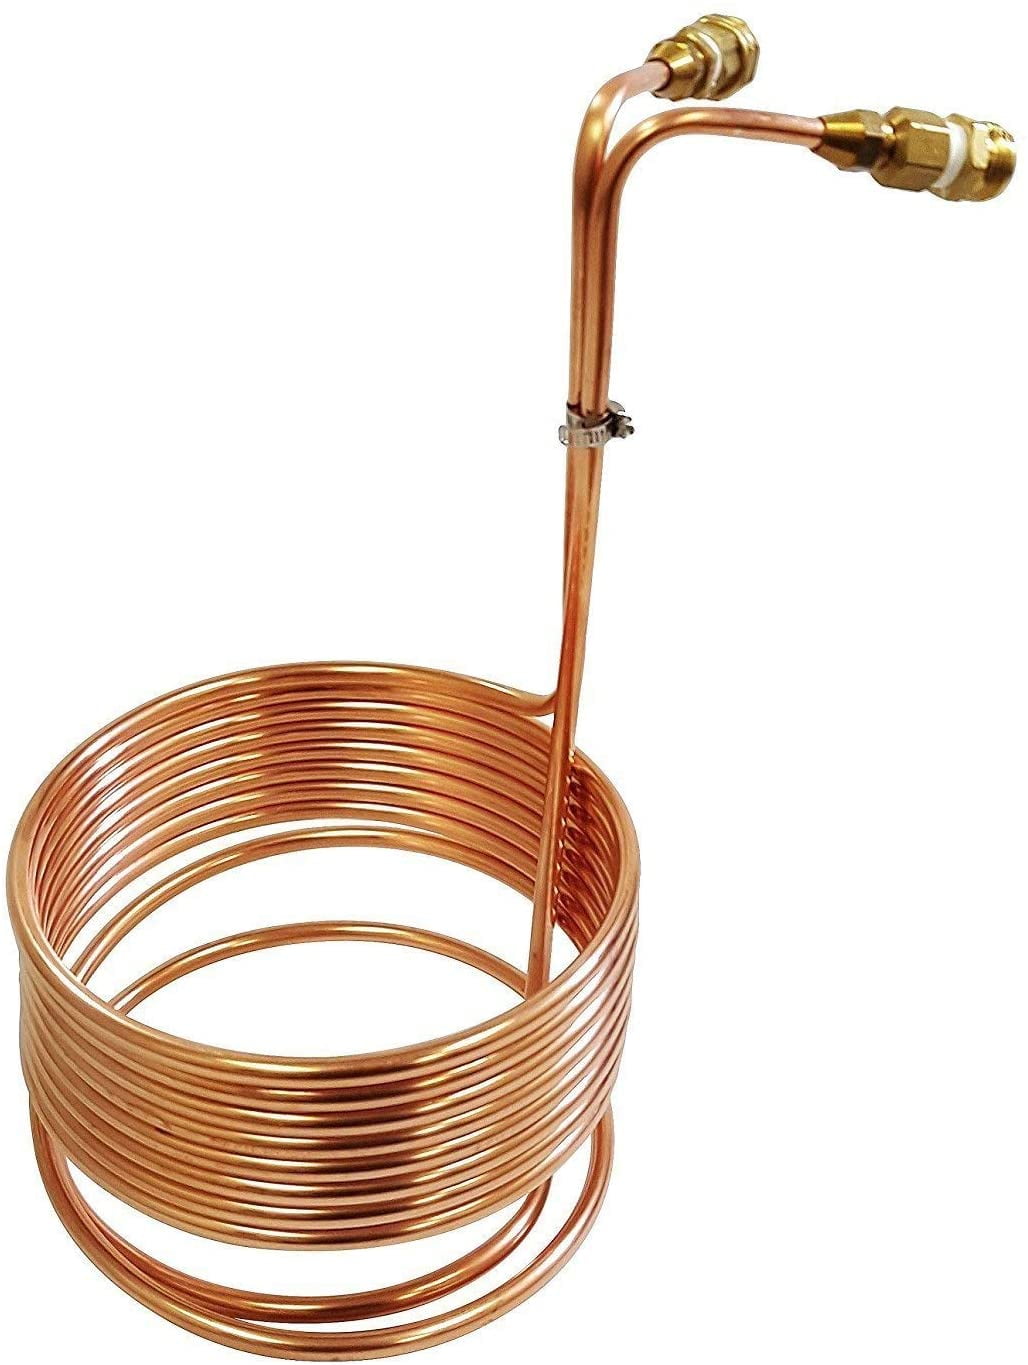 50 X 1/2 Quick Chill Home Brew Copper Immersion Wort Chiller 